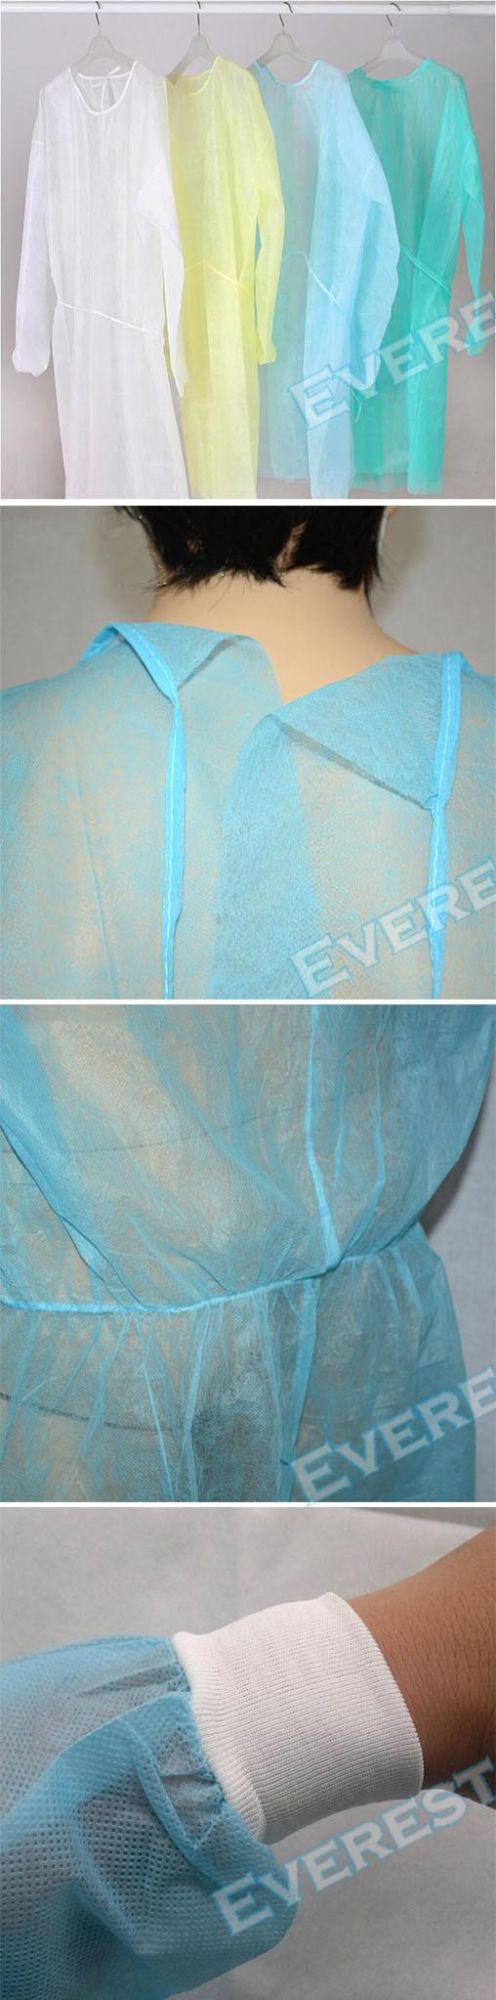 Long Sleeve Isolation Gown with Tie, Dust Coat,